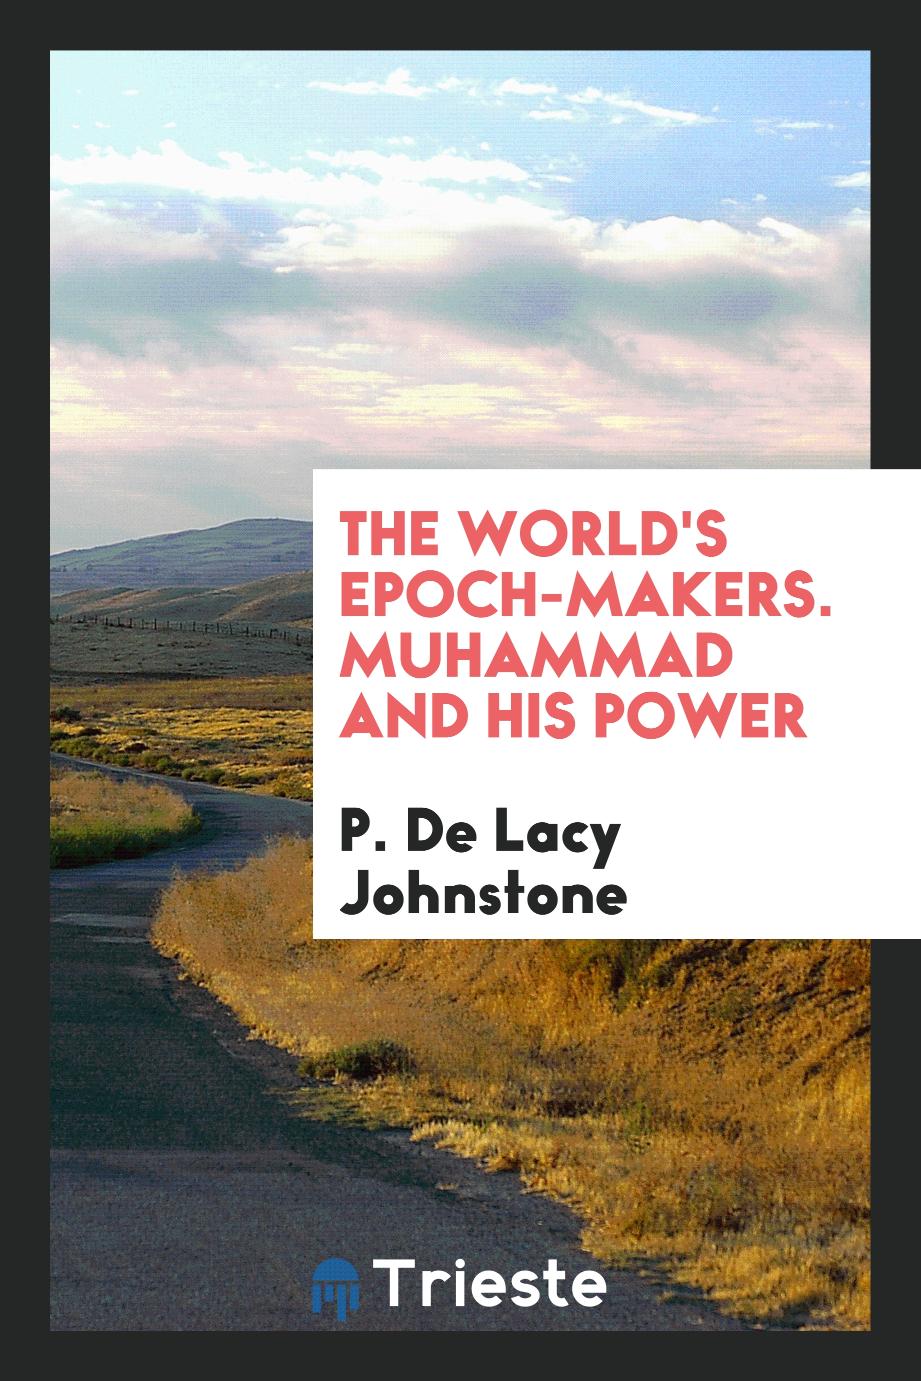 The World's epoch-makers. Muhammad and his power